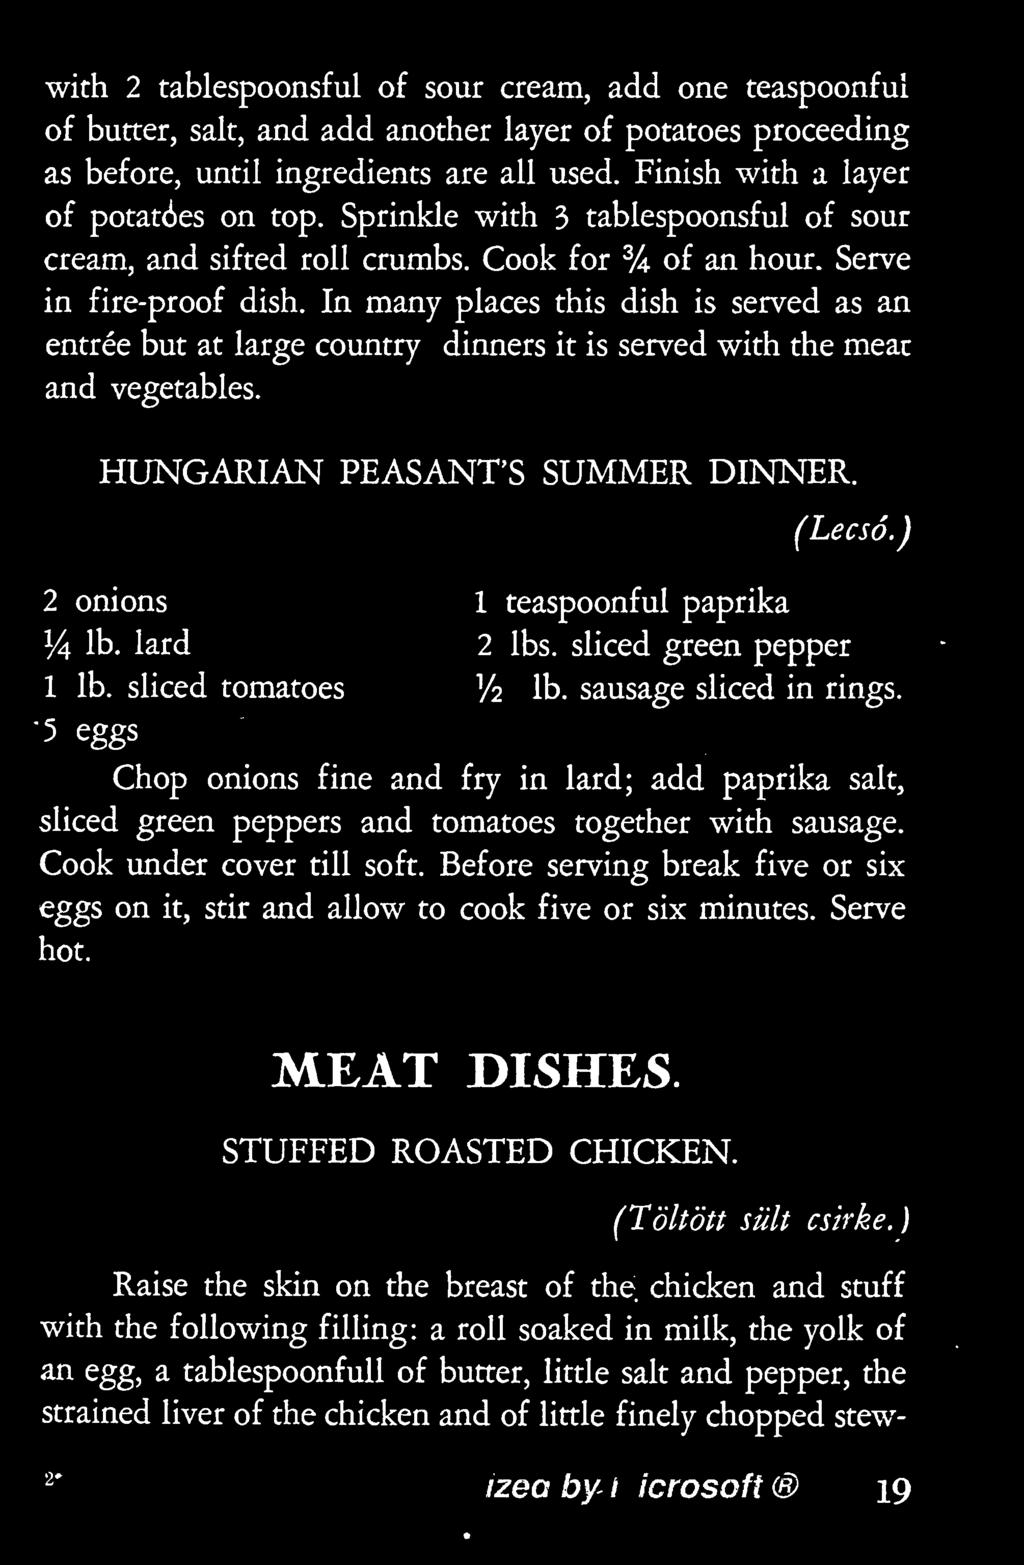 In many places this dish is served as an entree but at large country dinners it is served with the meat and vegetables. HUNGARIAN PEASANT'S SUMMER DINNER. (Lecso.